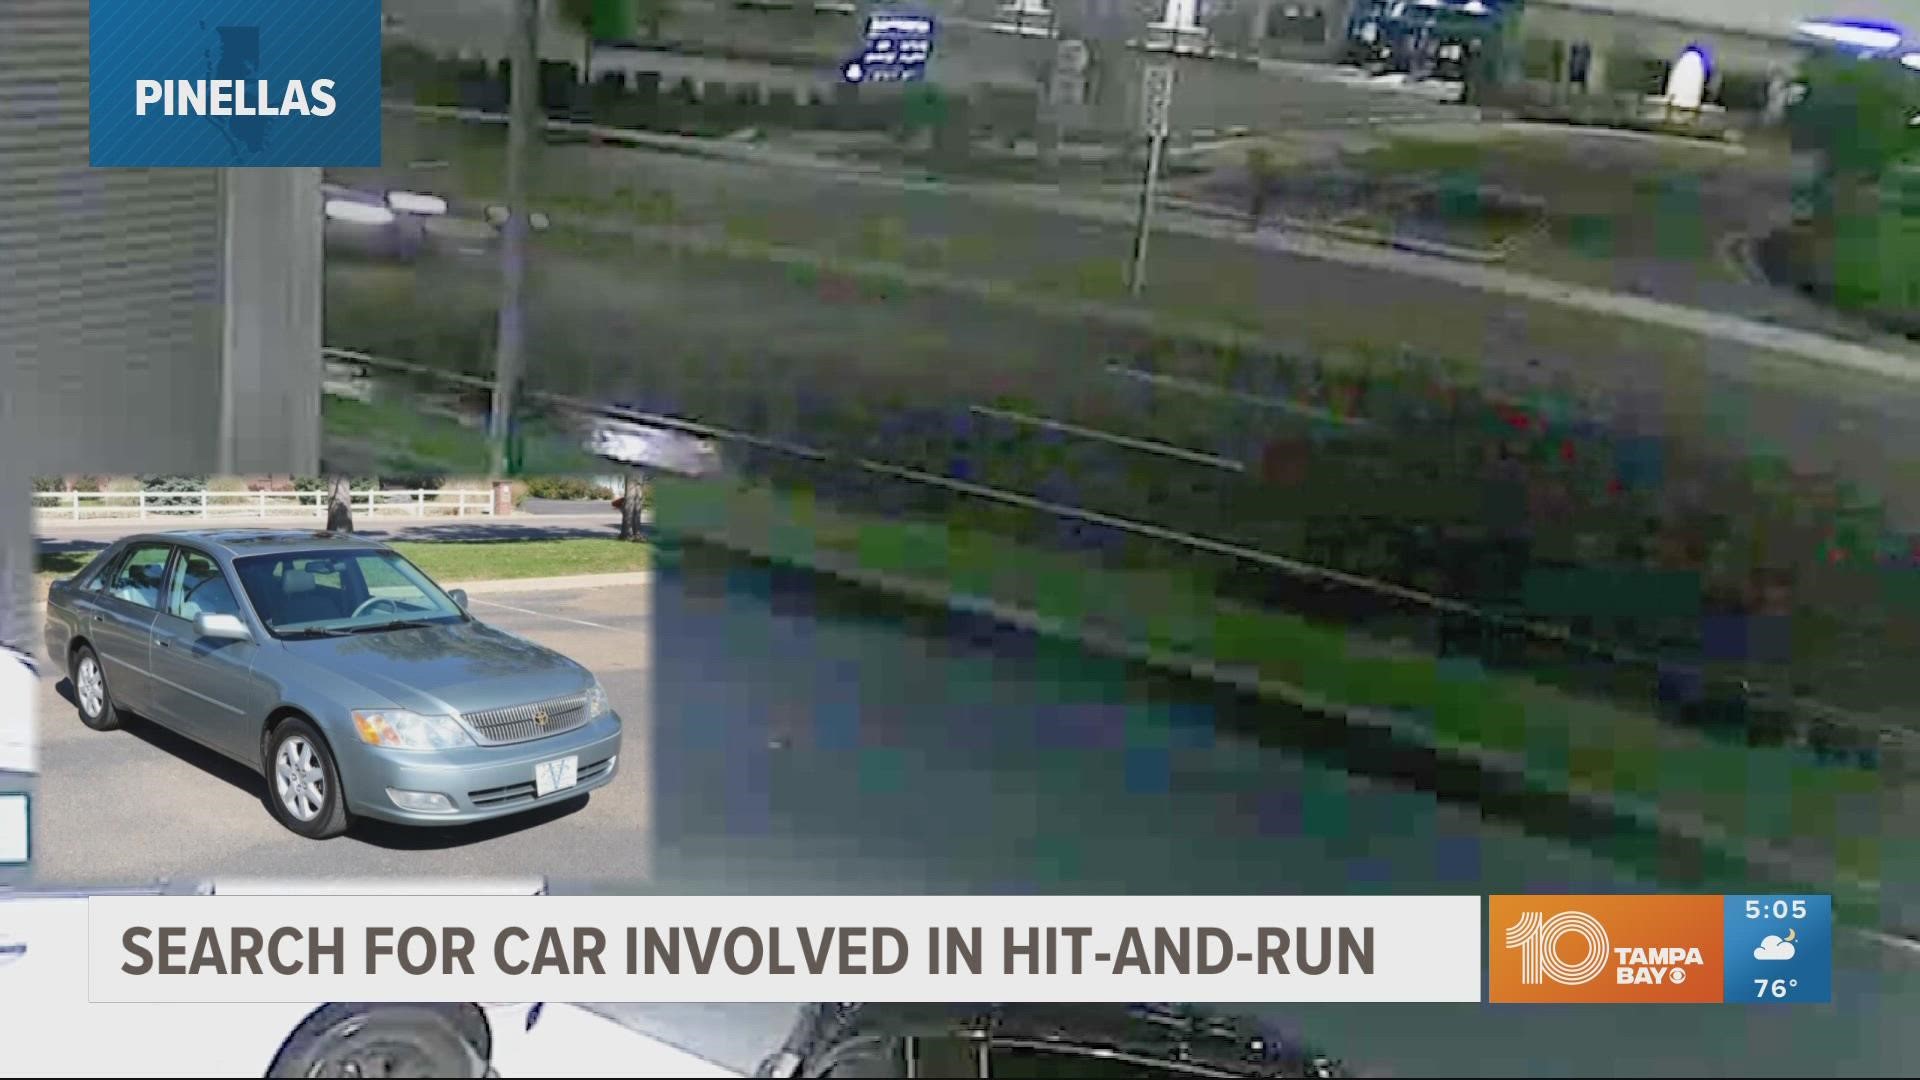 The car fled from the scene after hitting the person, the St. Petersburg Police Department says.